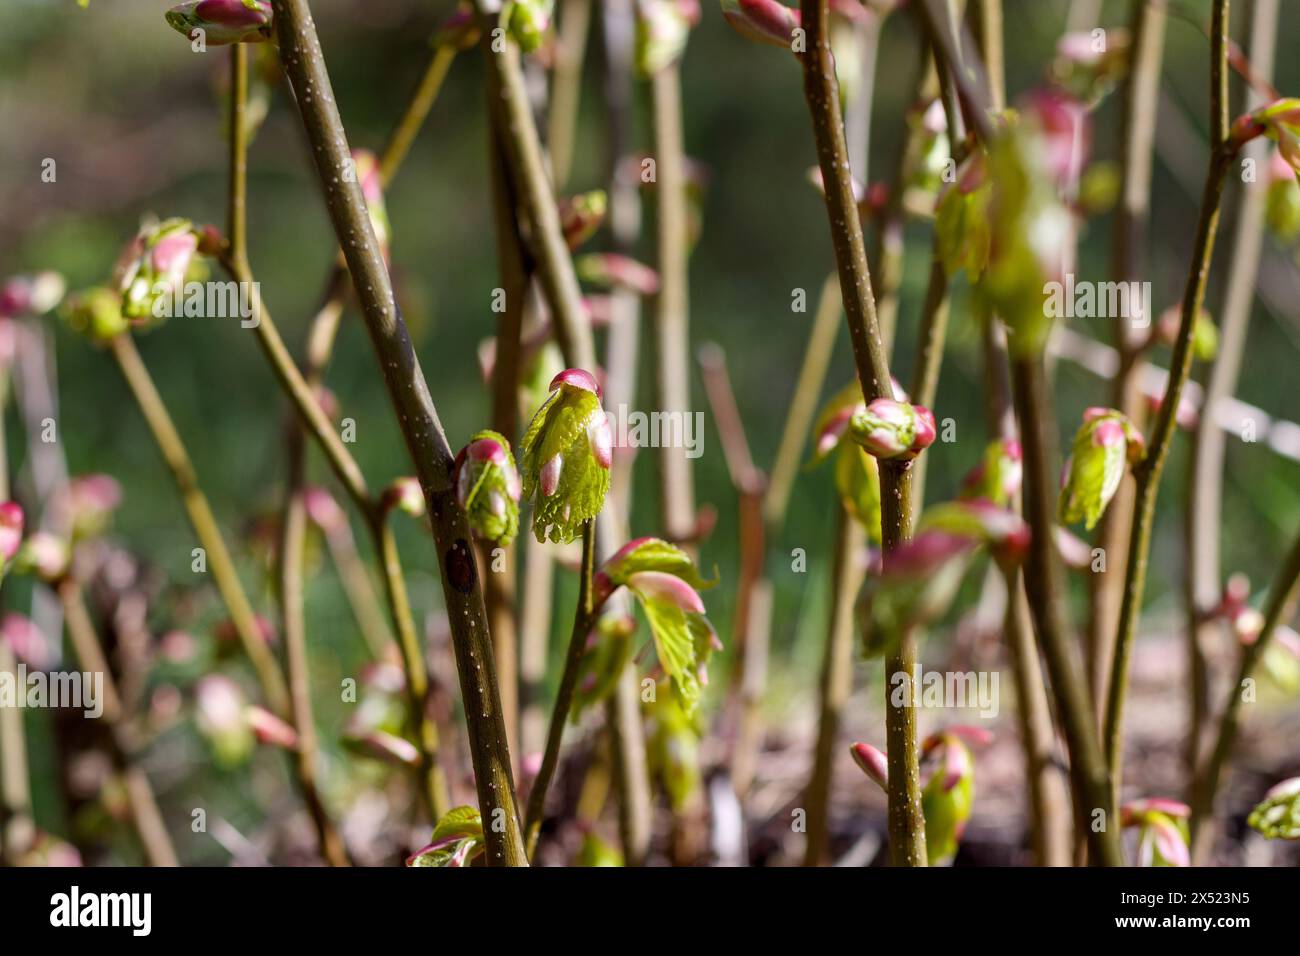 close-up of young tree branches with pink buds Stock Photo